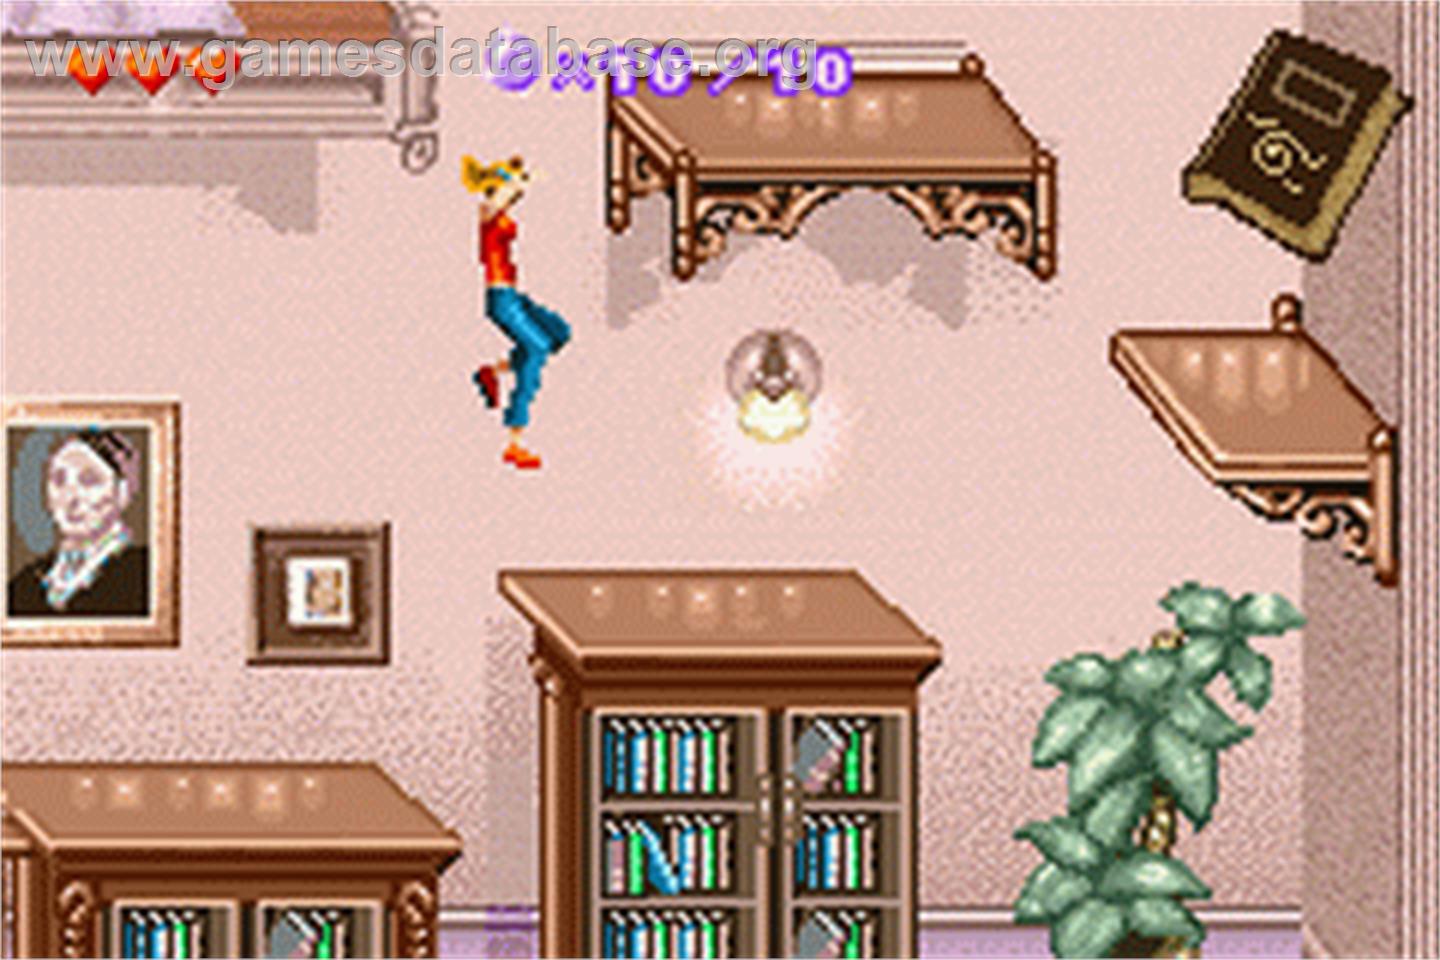 Sabrina, the Teenage Witch: Potion Commotion - Nintendo Game Boy Advance - Artwork - In Game